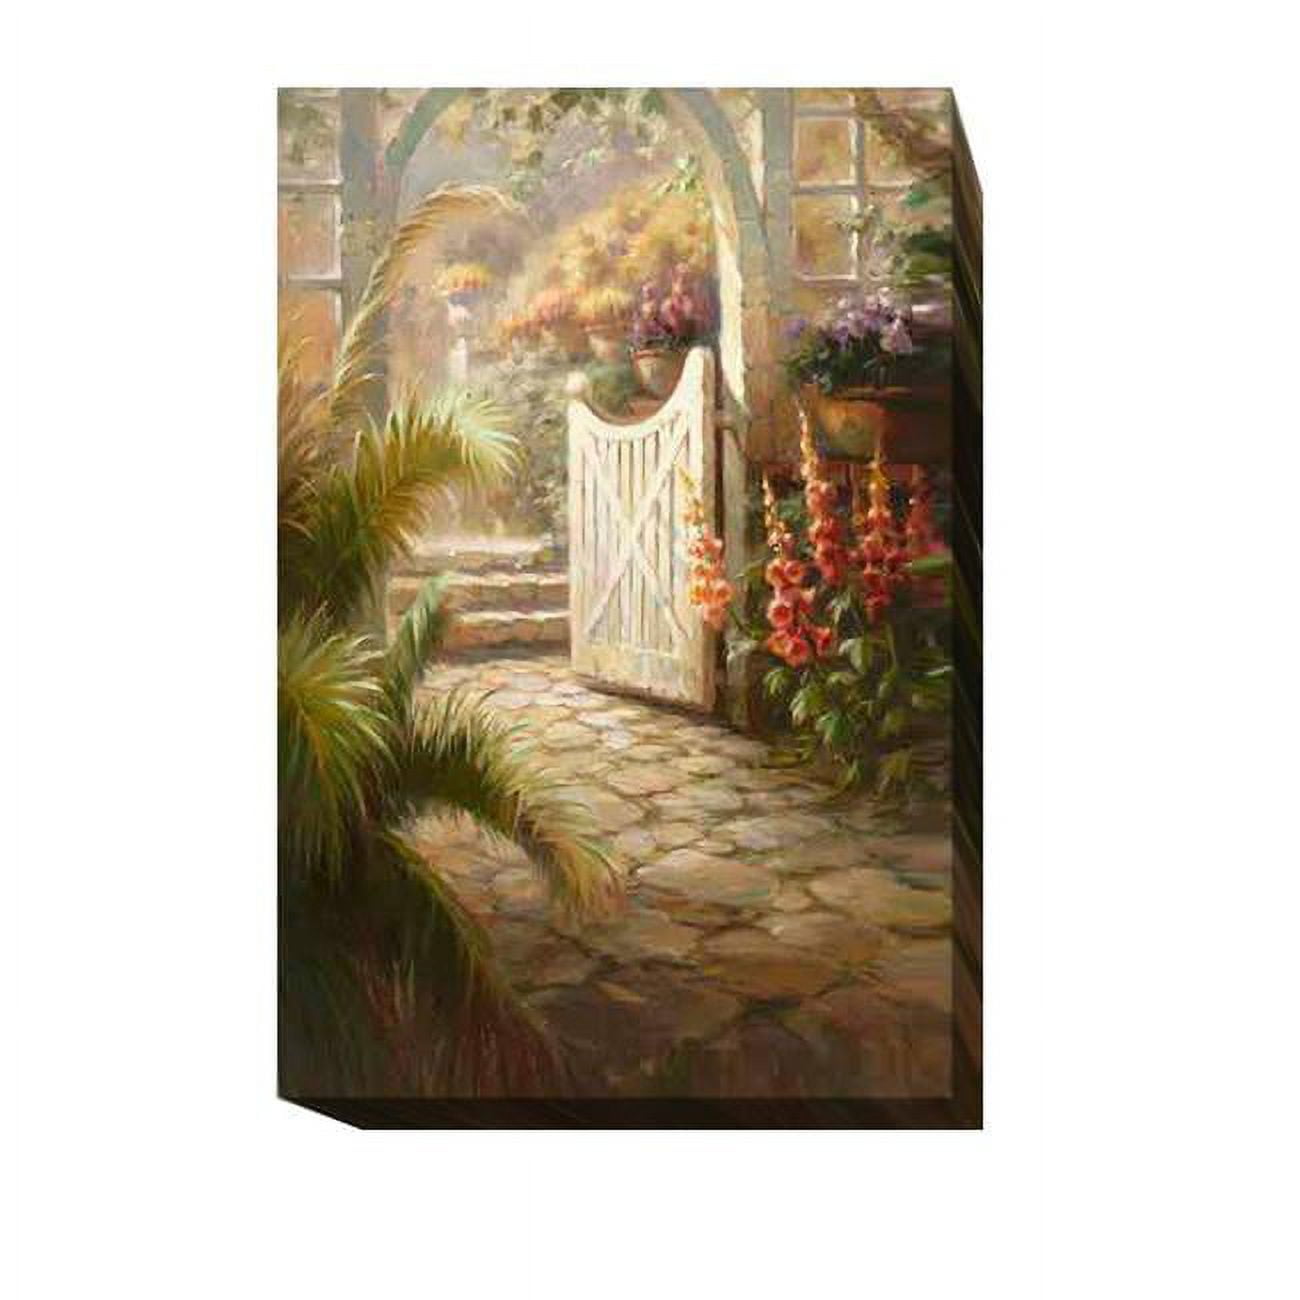 1624g533eg Morning In The Garden By Roberto Lombardi Premium Gallery-wrapped Canvas Giclee Art - 16 X 24 X 1.5 In.